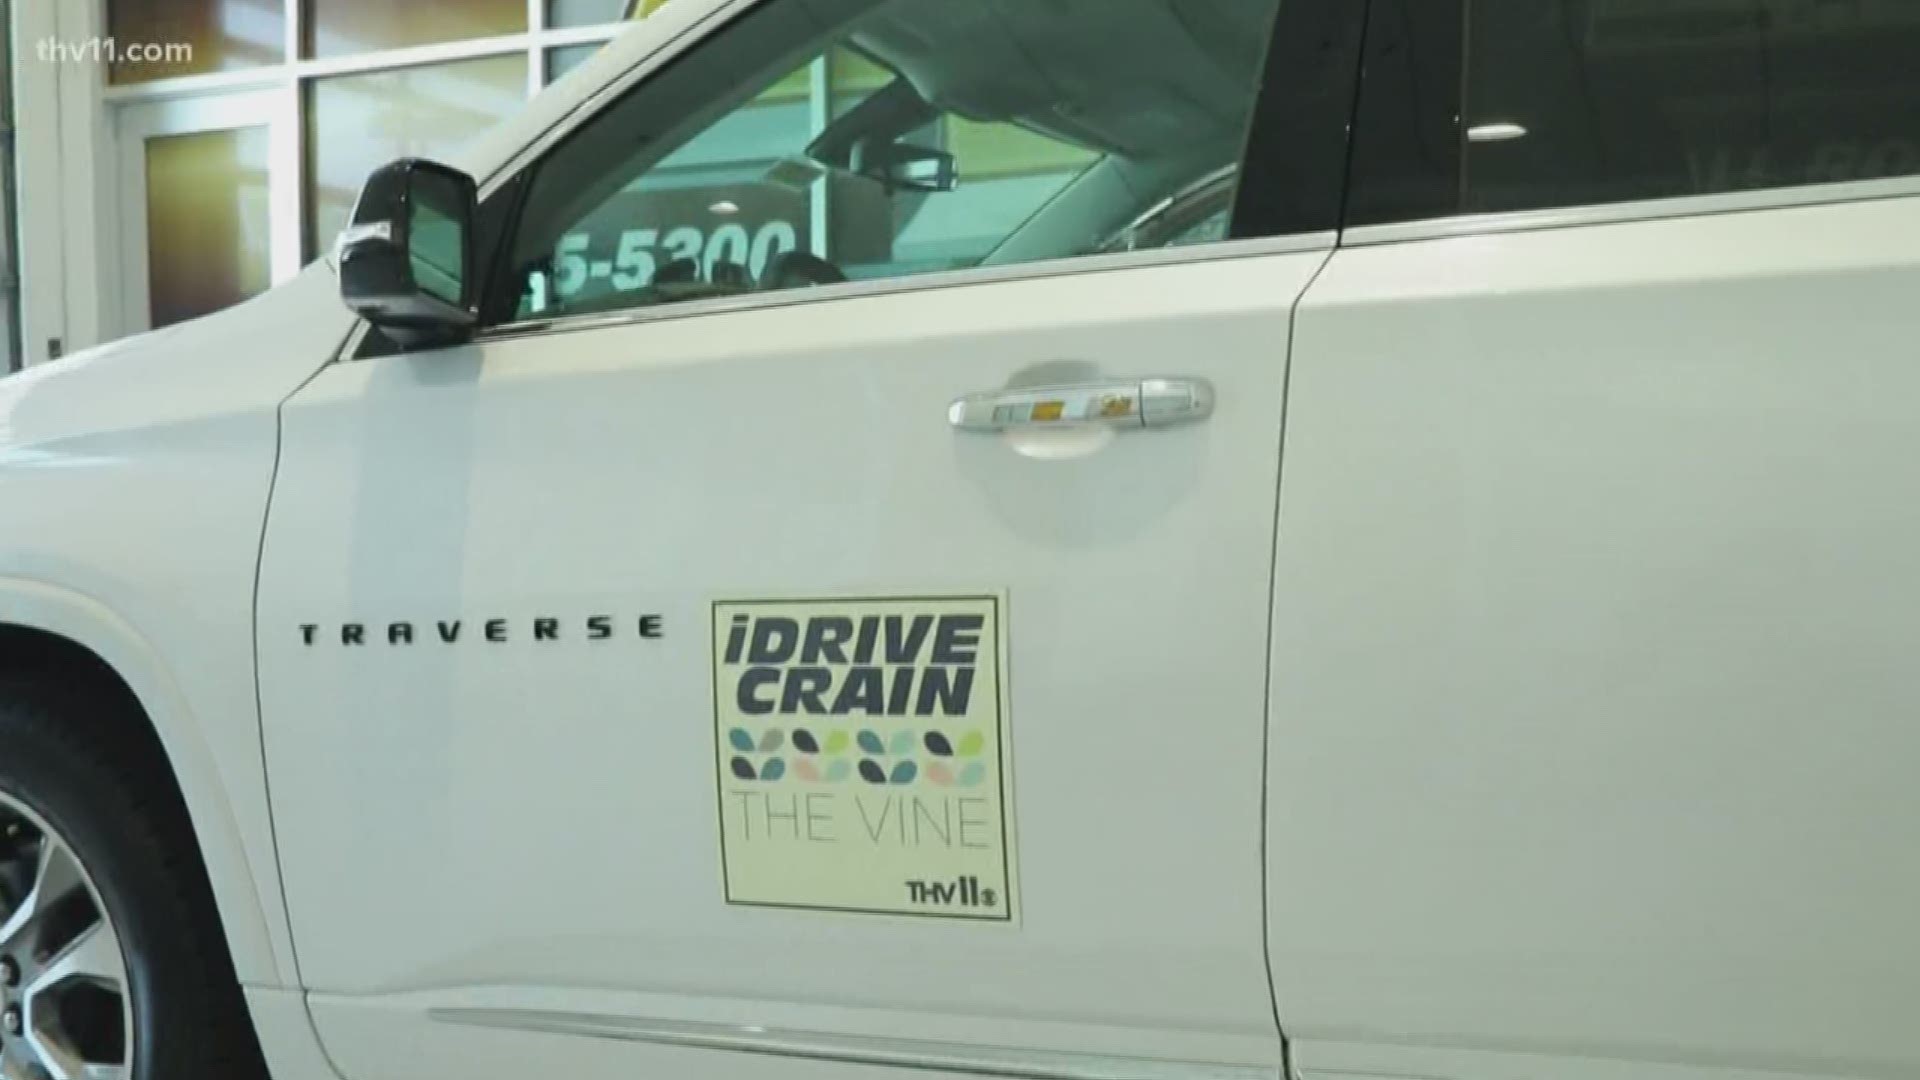 The Vine's Adam Bledsoe and the iDrive Crain Team took a ride in the 2019 Chevrolet Traverse.